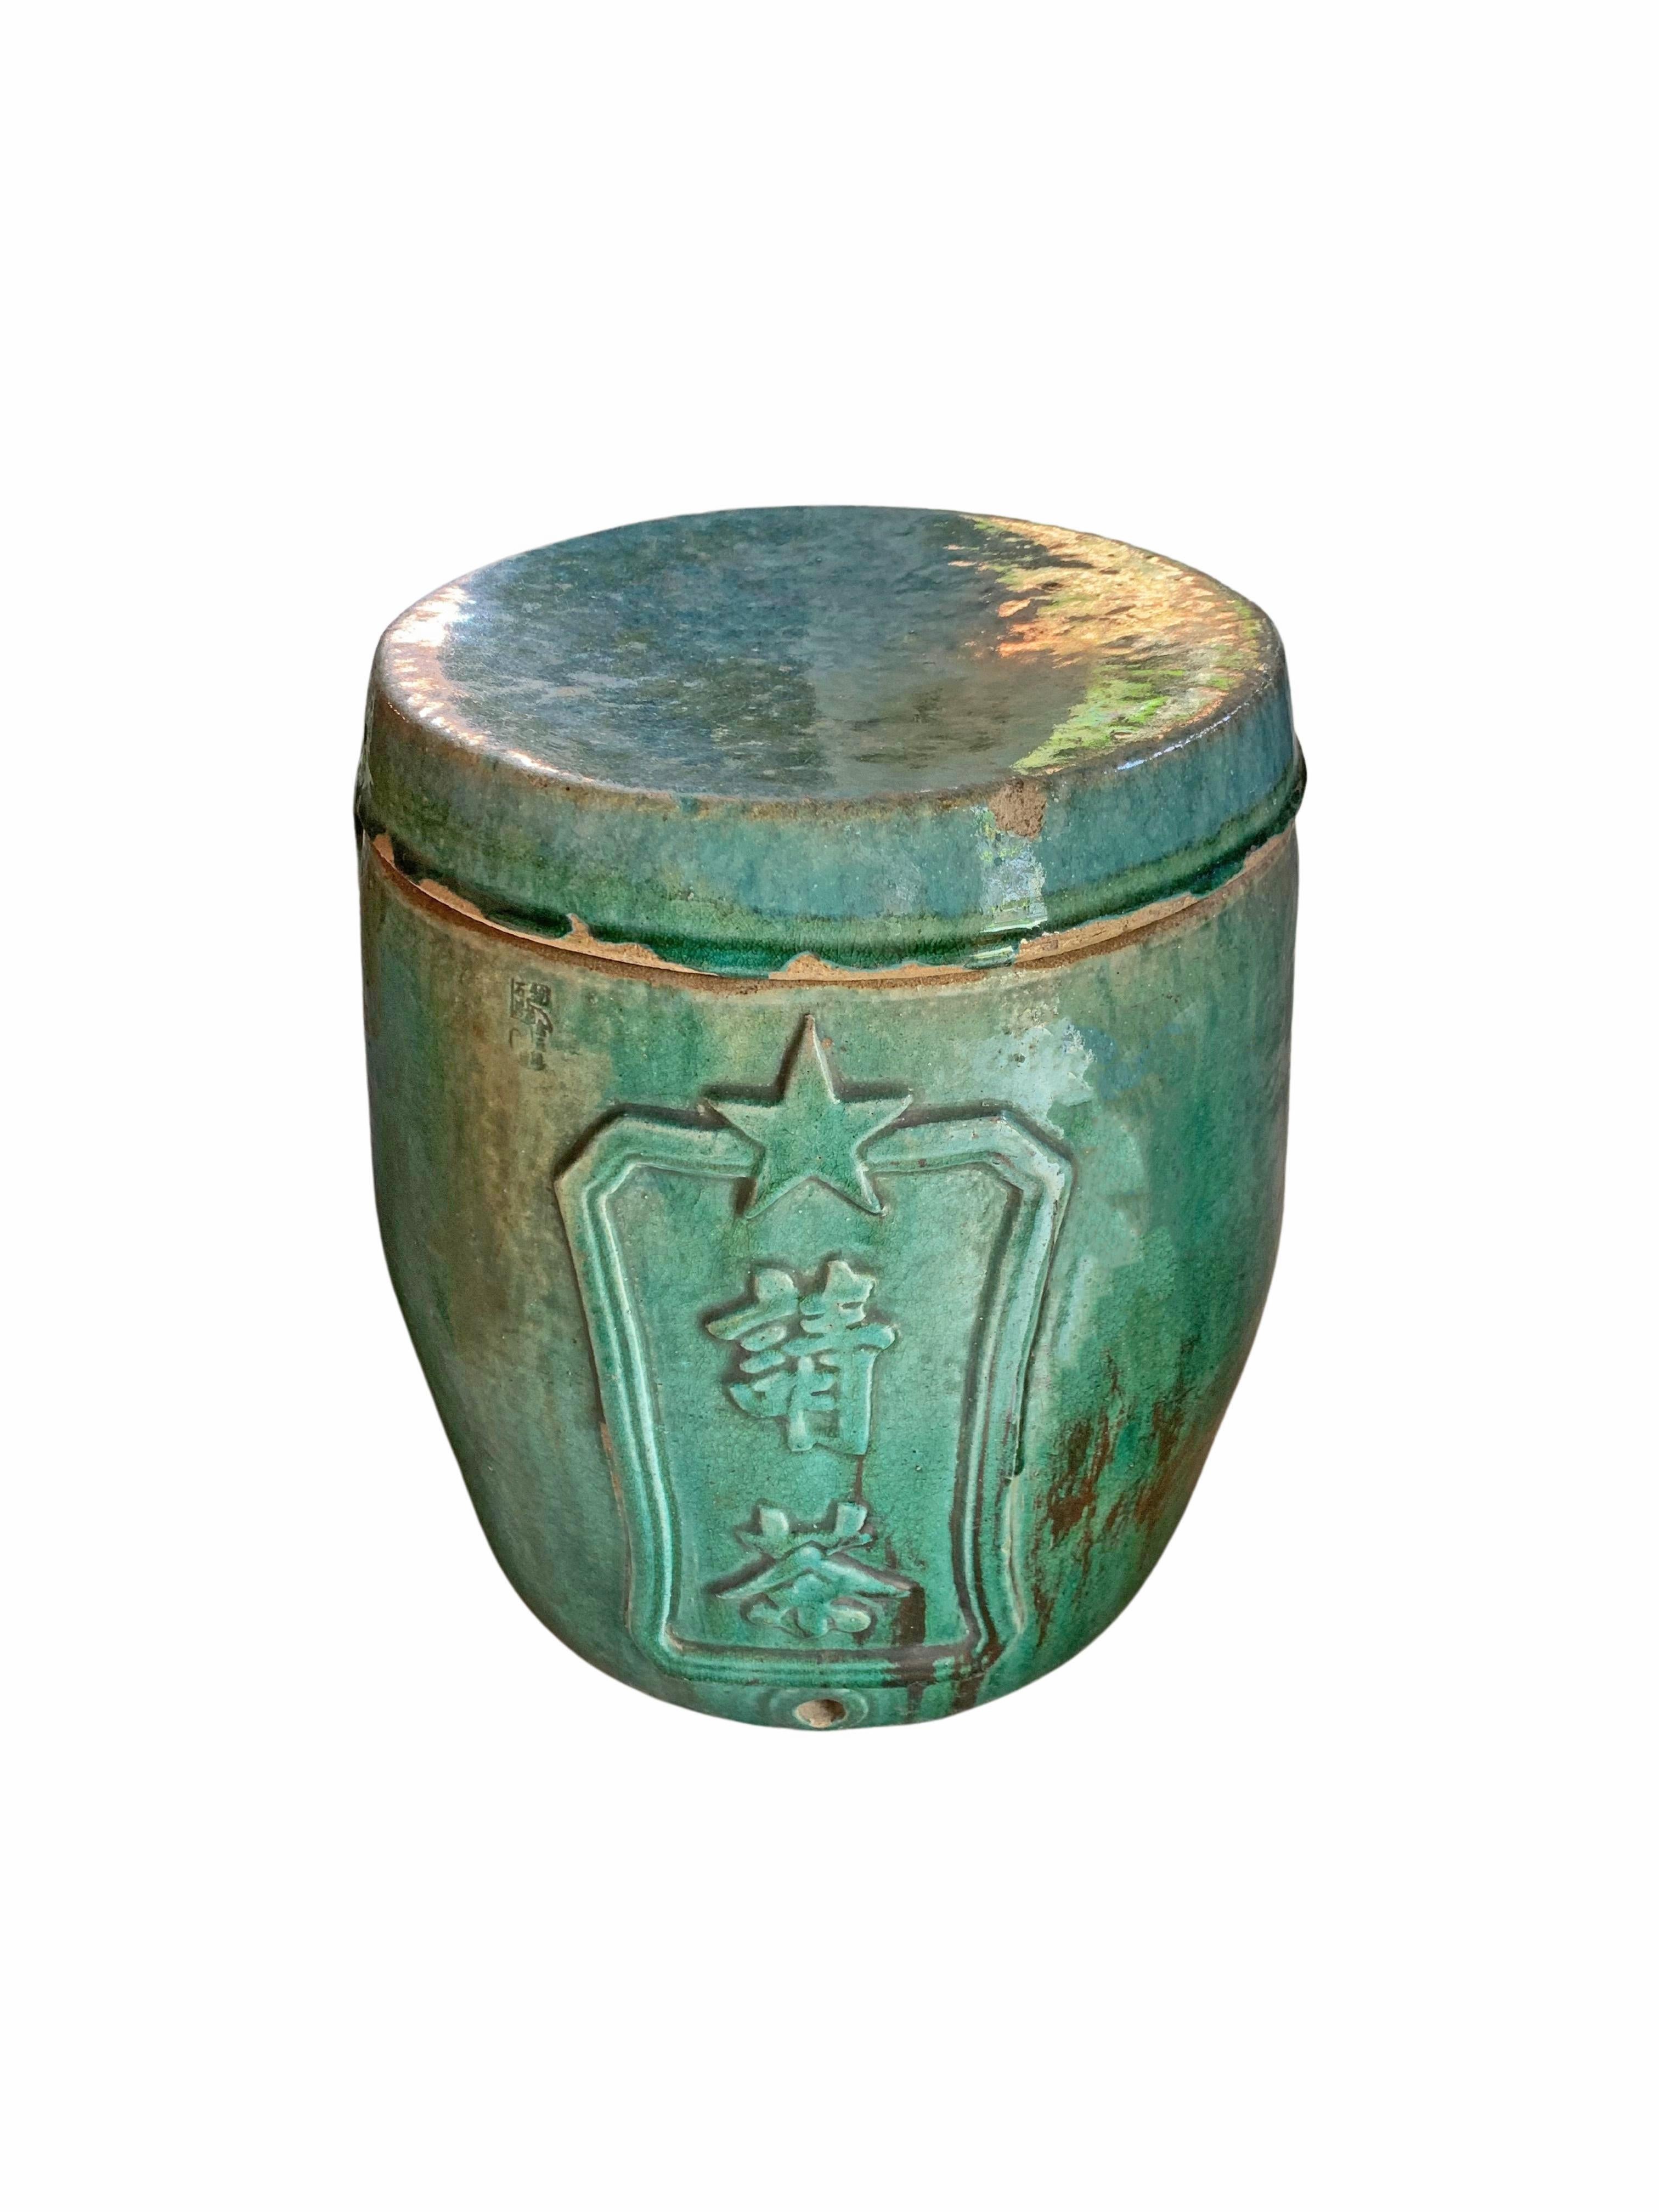 Other Chinese Ceramic Shiwan Tea Dispenser Jar with Engraved Characters, c. 1950 For Sale